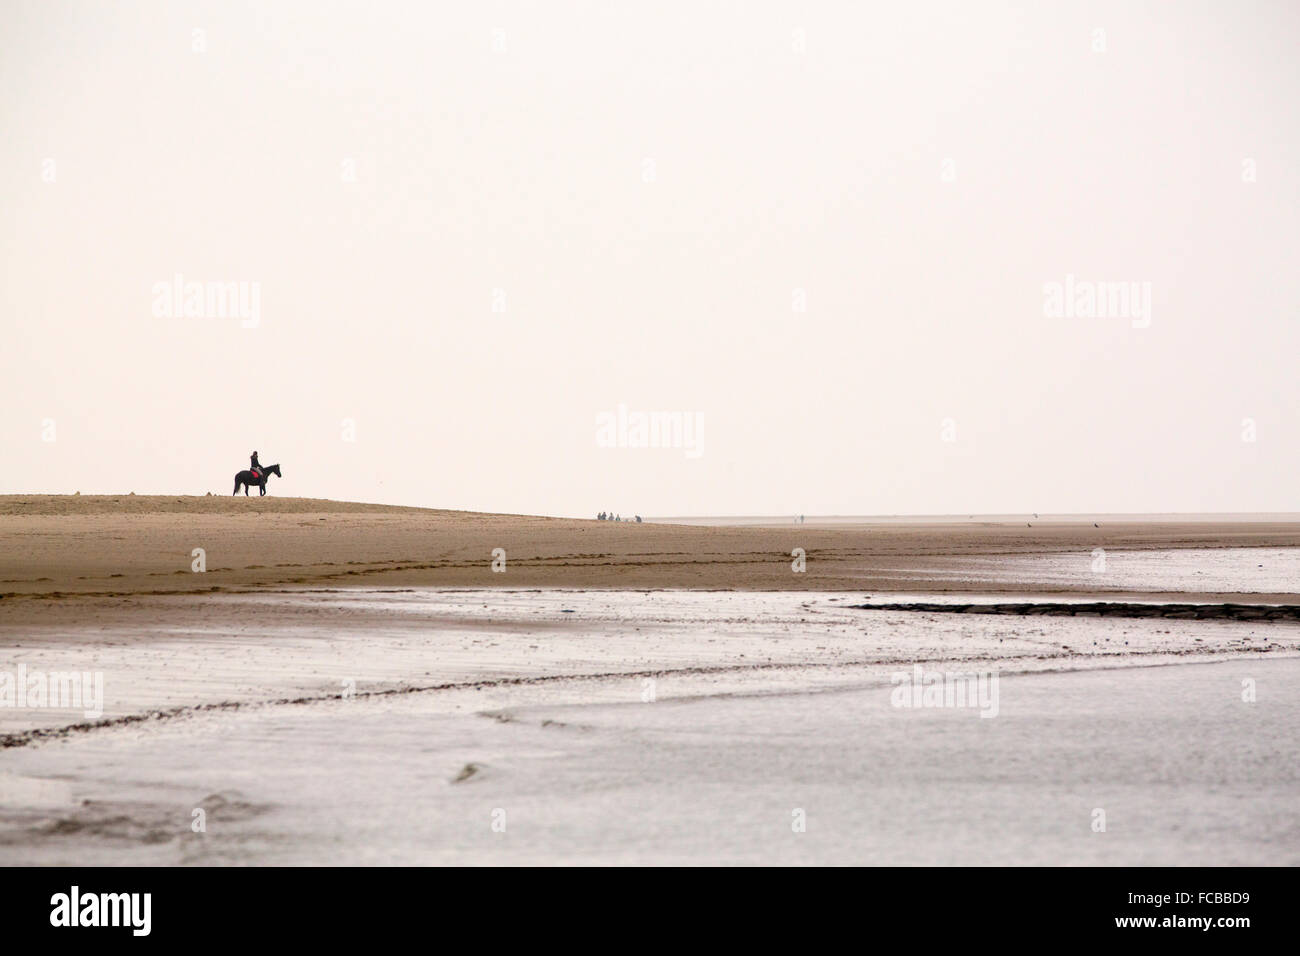 Netherlands, Renesse, Woman riding horse on beach Stock Photo